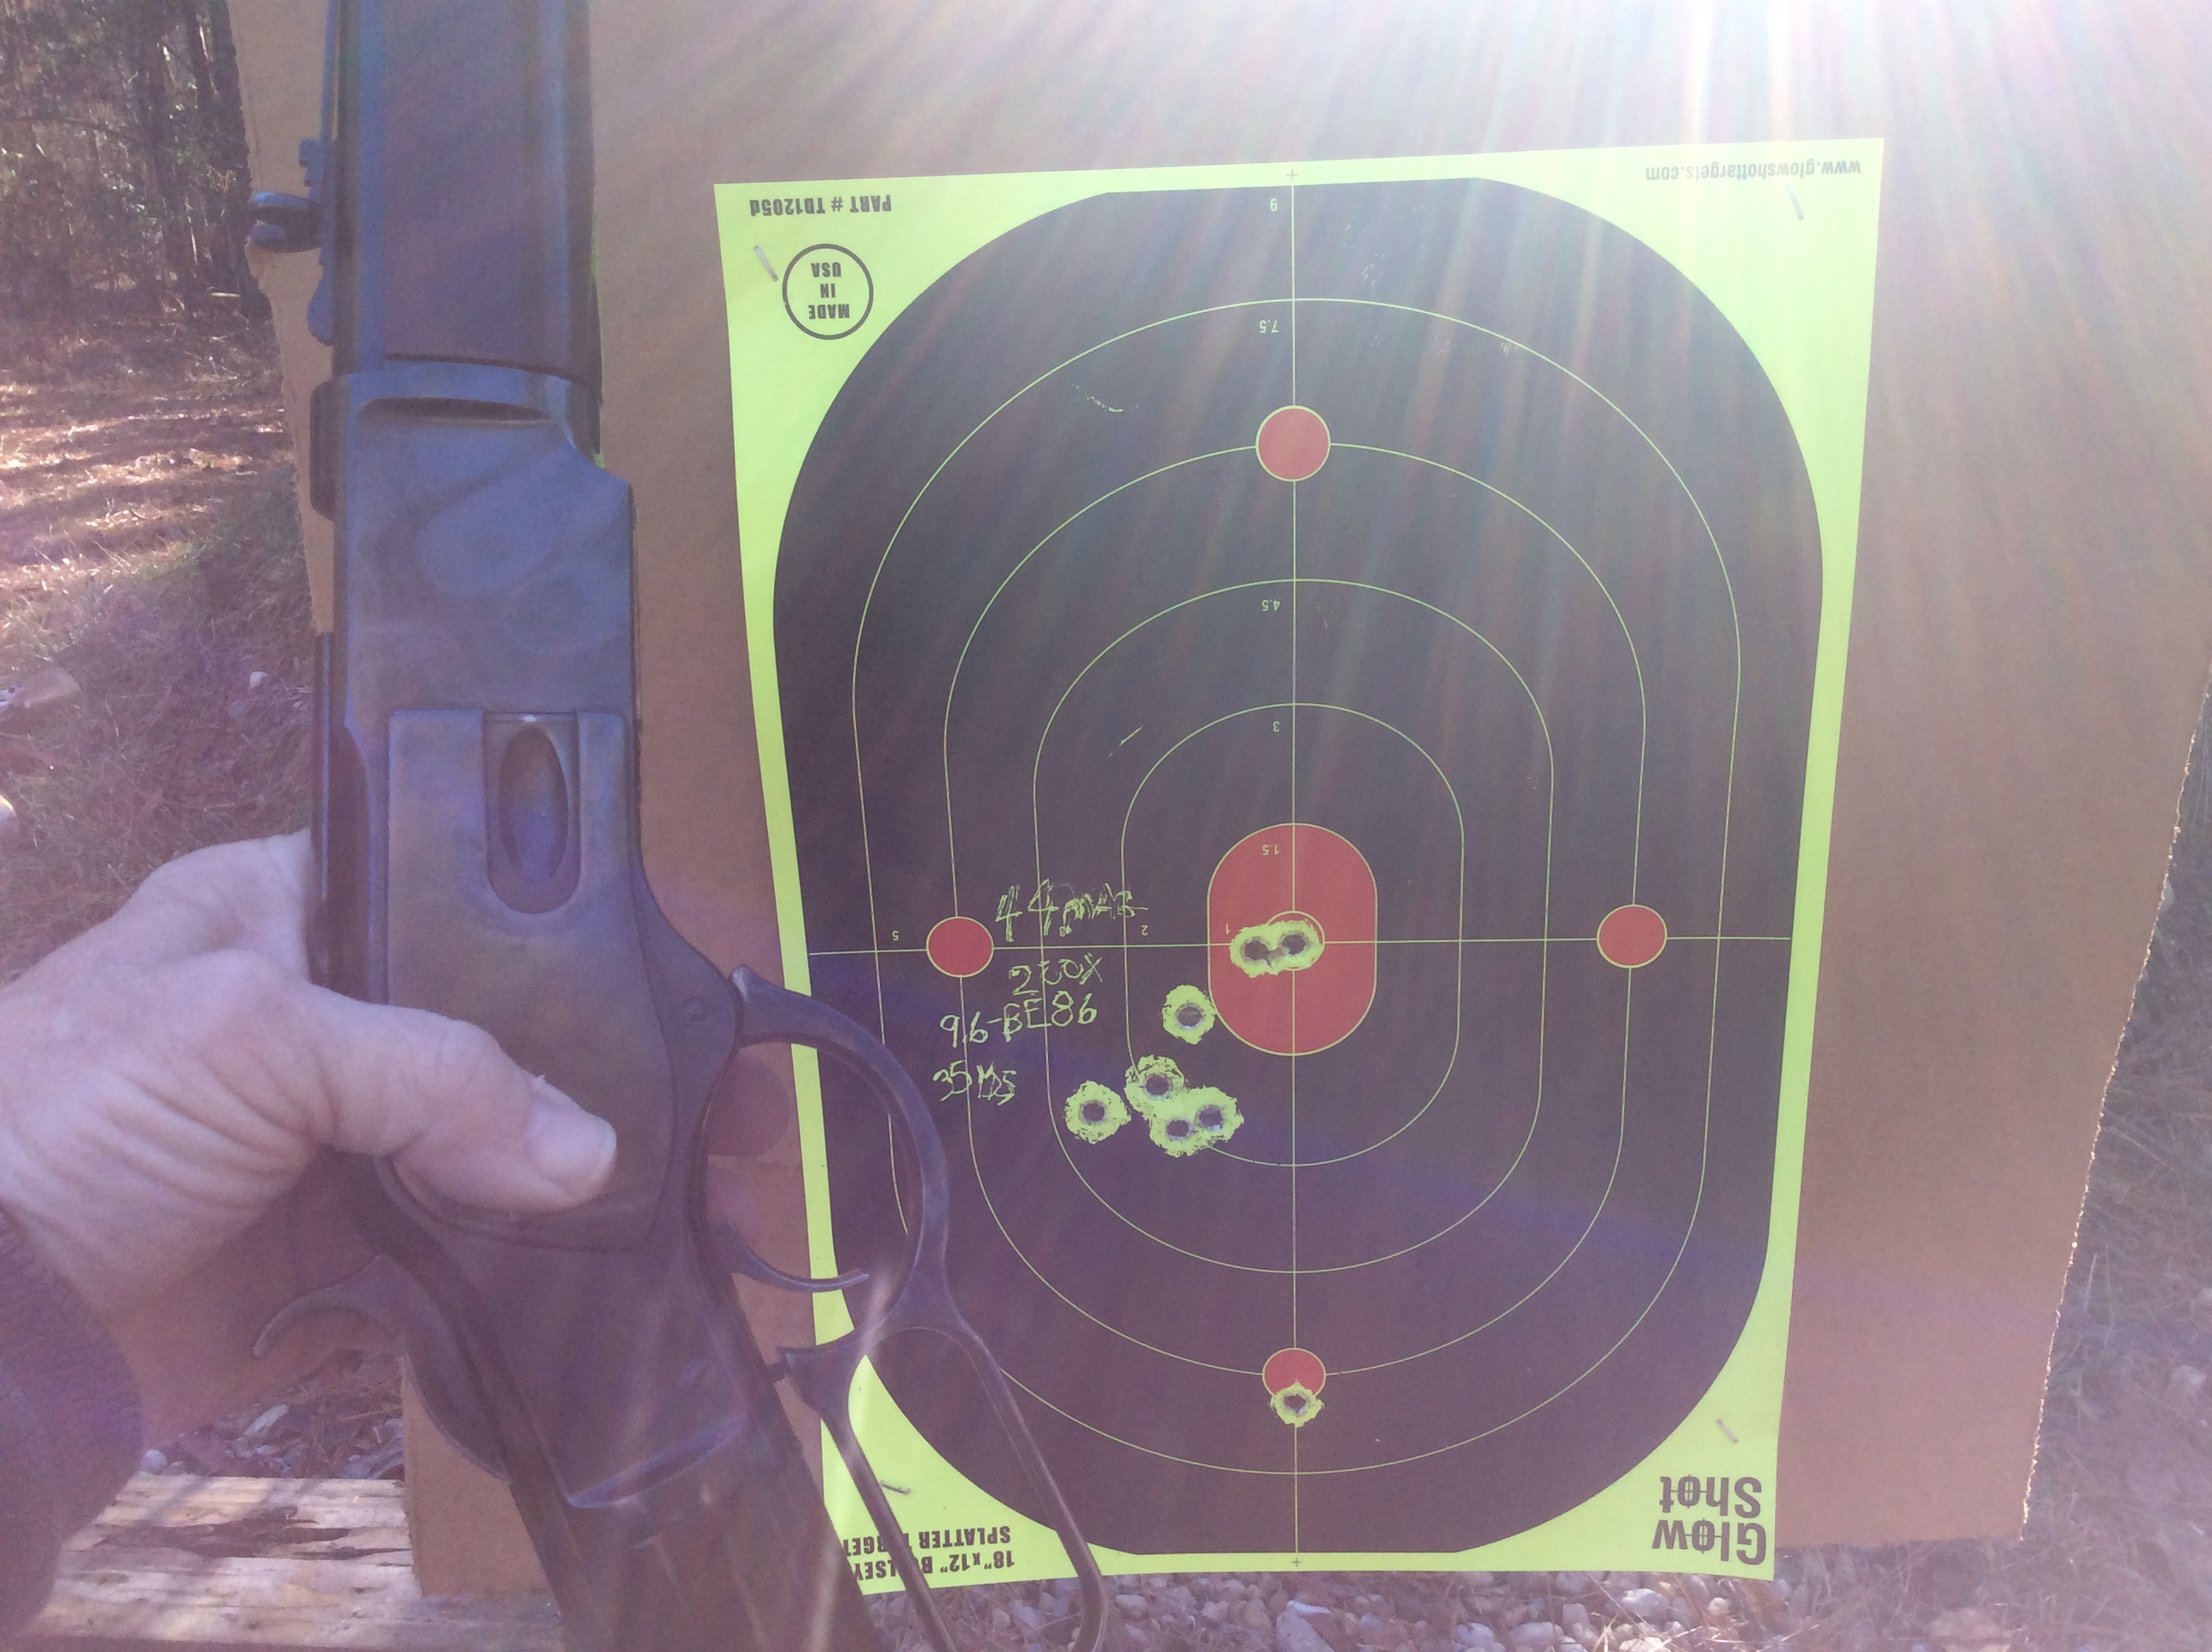 Two shots of the 44 Mag load after a sight adjust